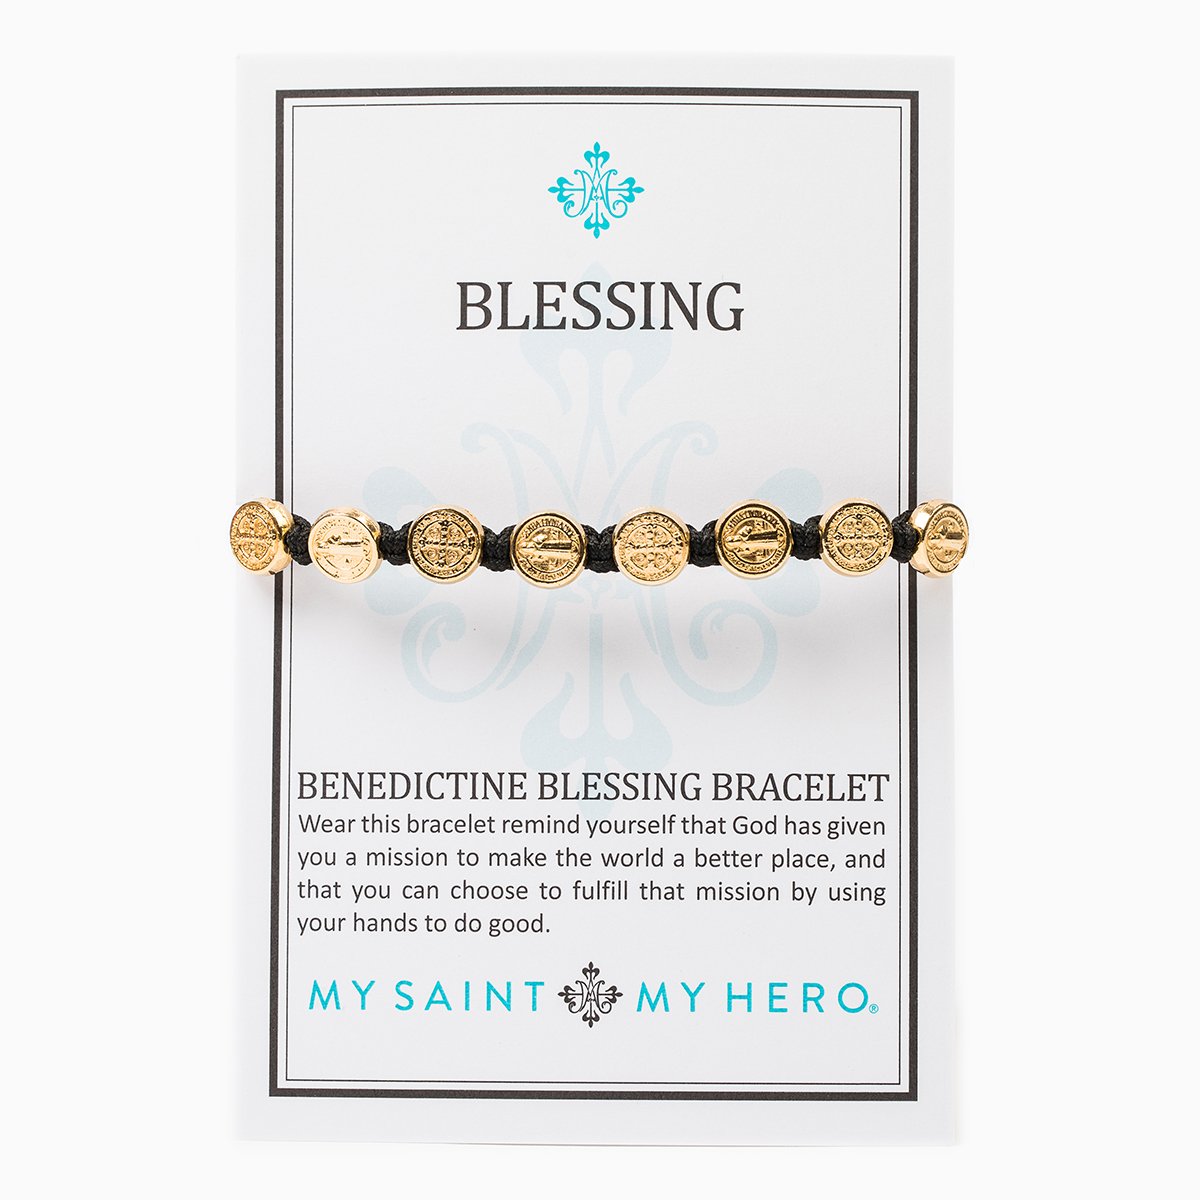 Benedictine Blessing Bracelet - Gold Medals by My Saint My Hero